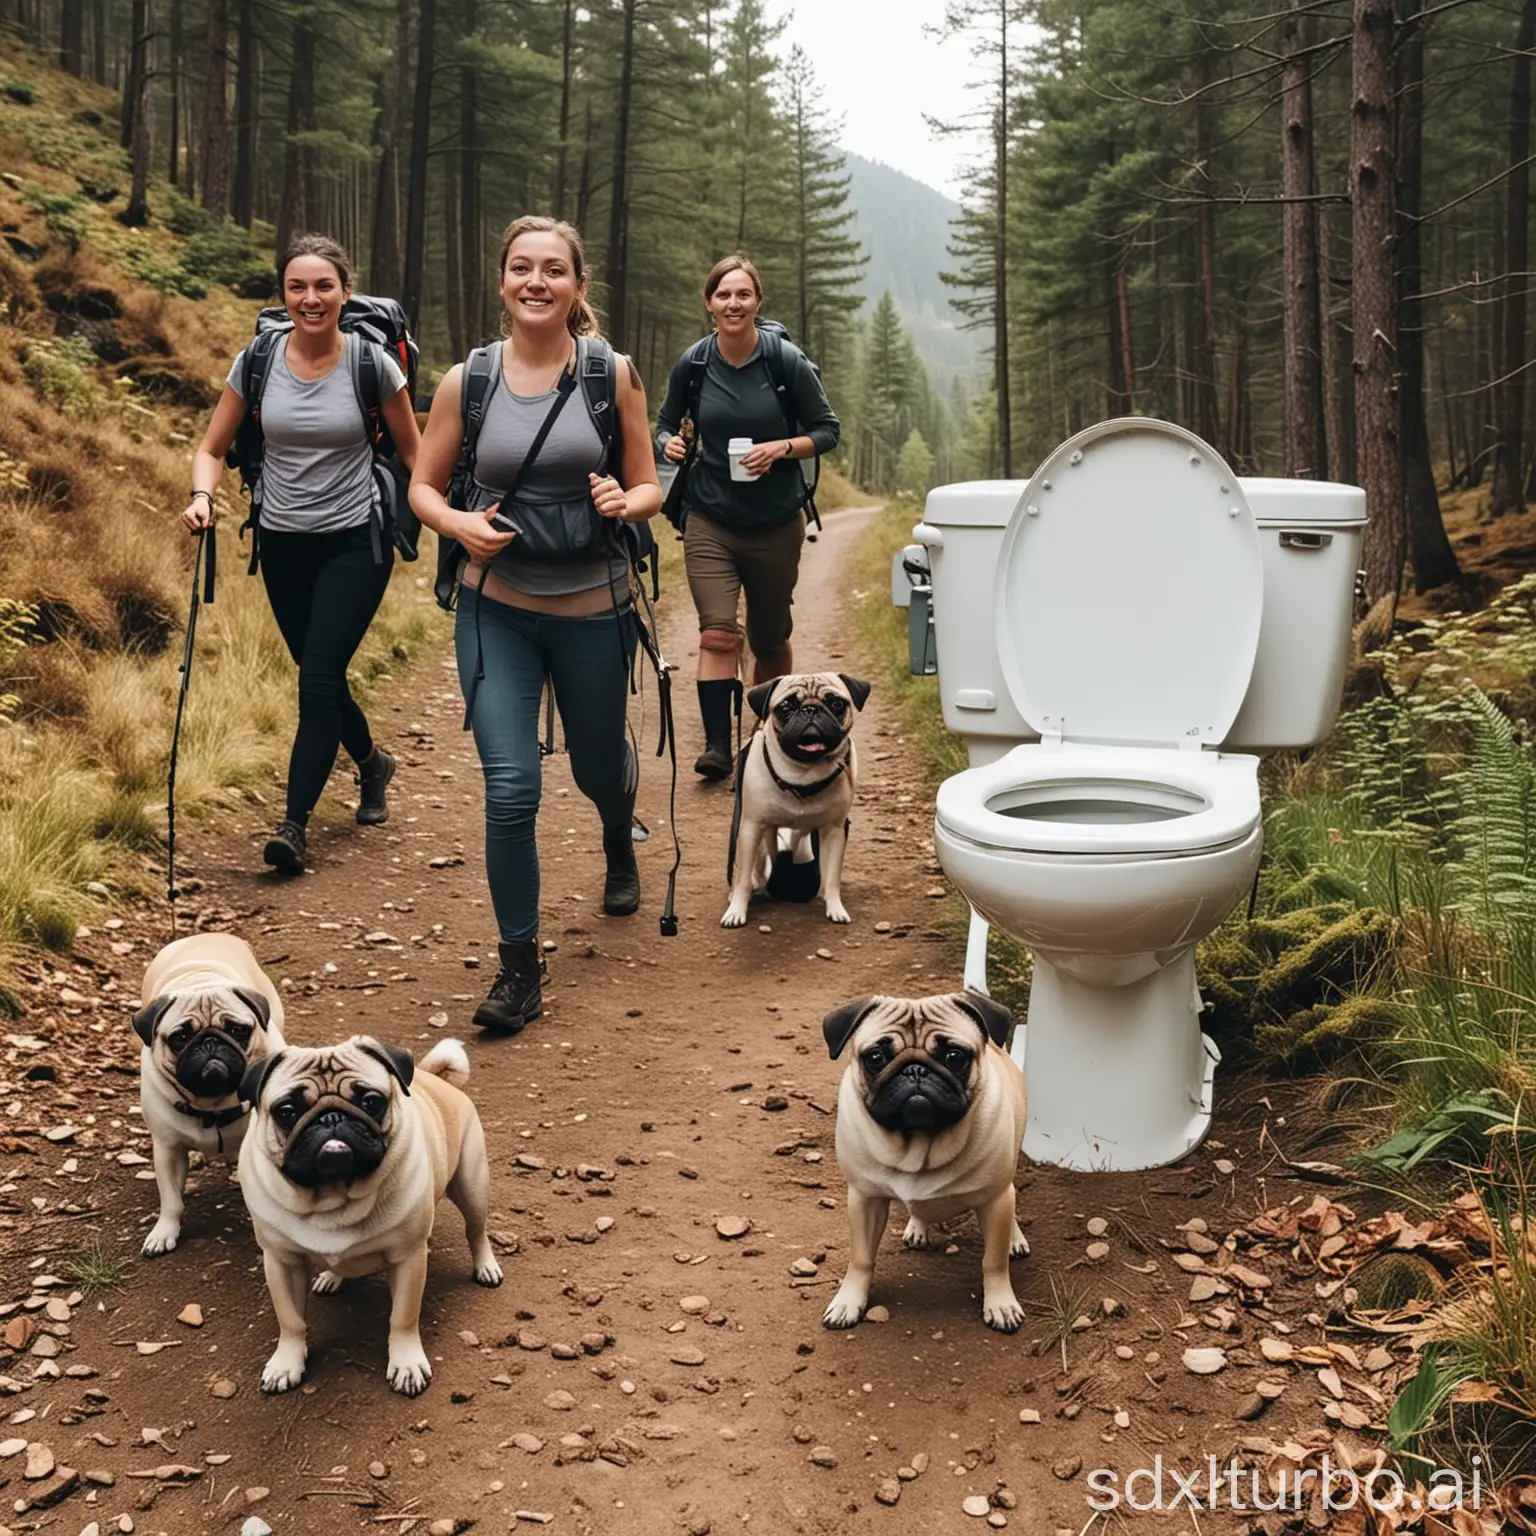 A group of people go hiking with a pug and a toilet